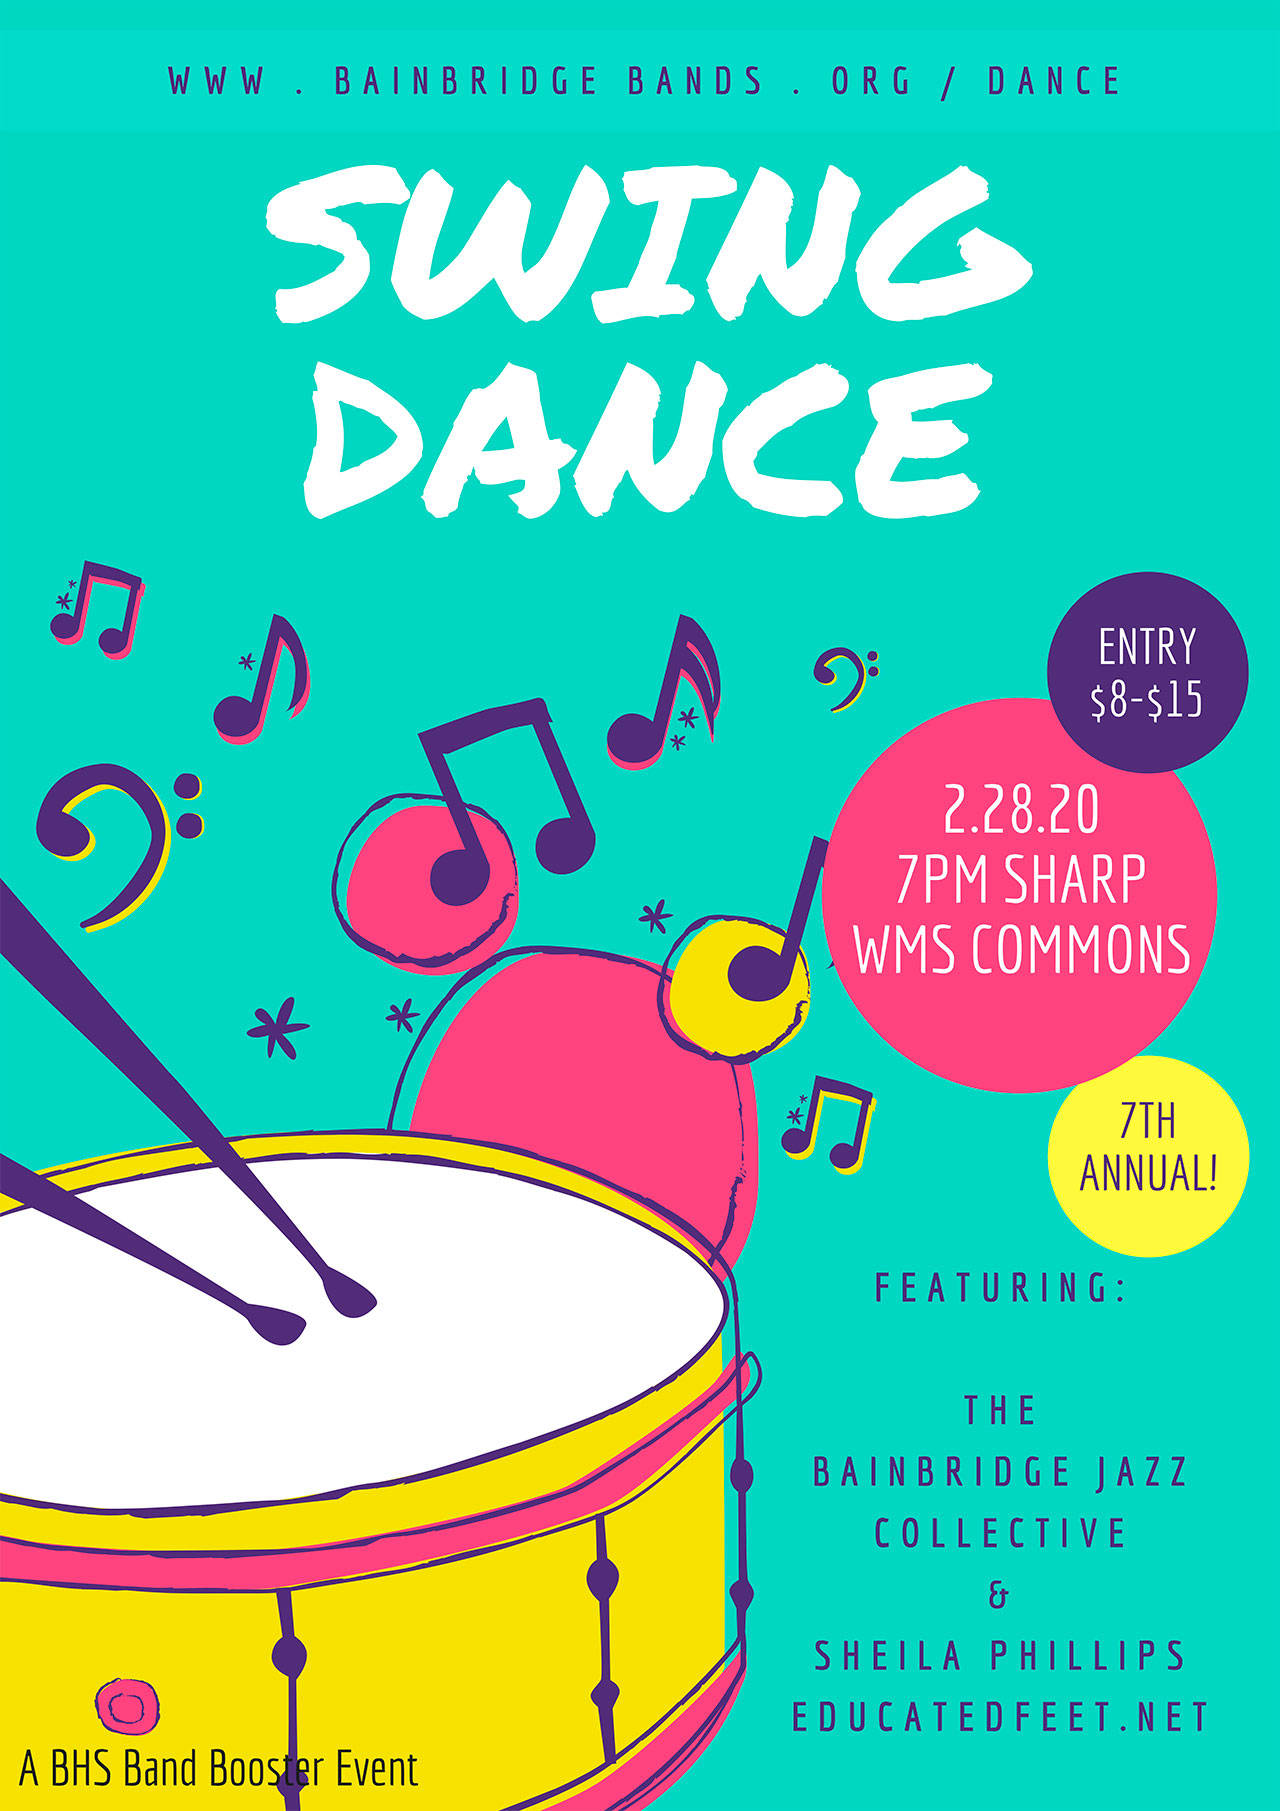 Image courtesy of Bainbridge High School Band Boosters | The Bainbridge High School Band Boosters will host the seventh annual Community Swing Dance at 7:30 p.m. Friday, Feb. 28 in the Woodward Middle School Commons.